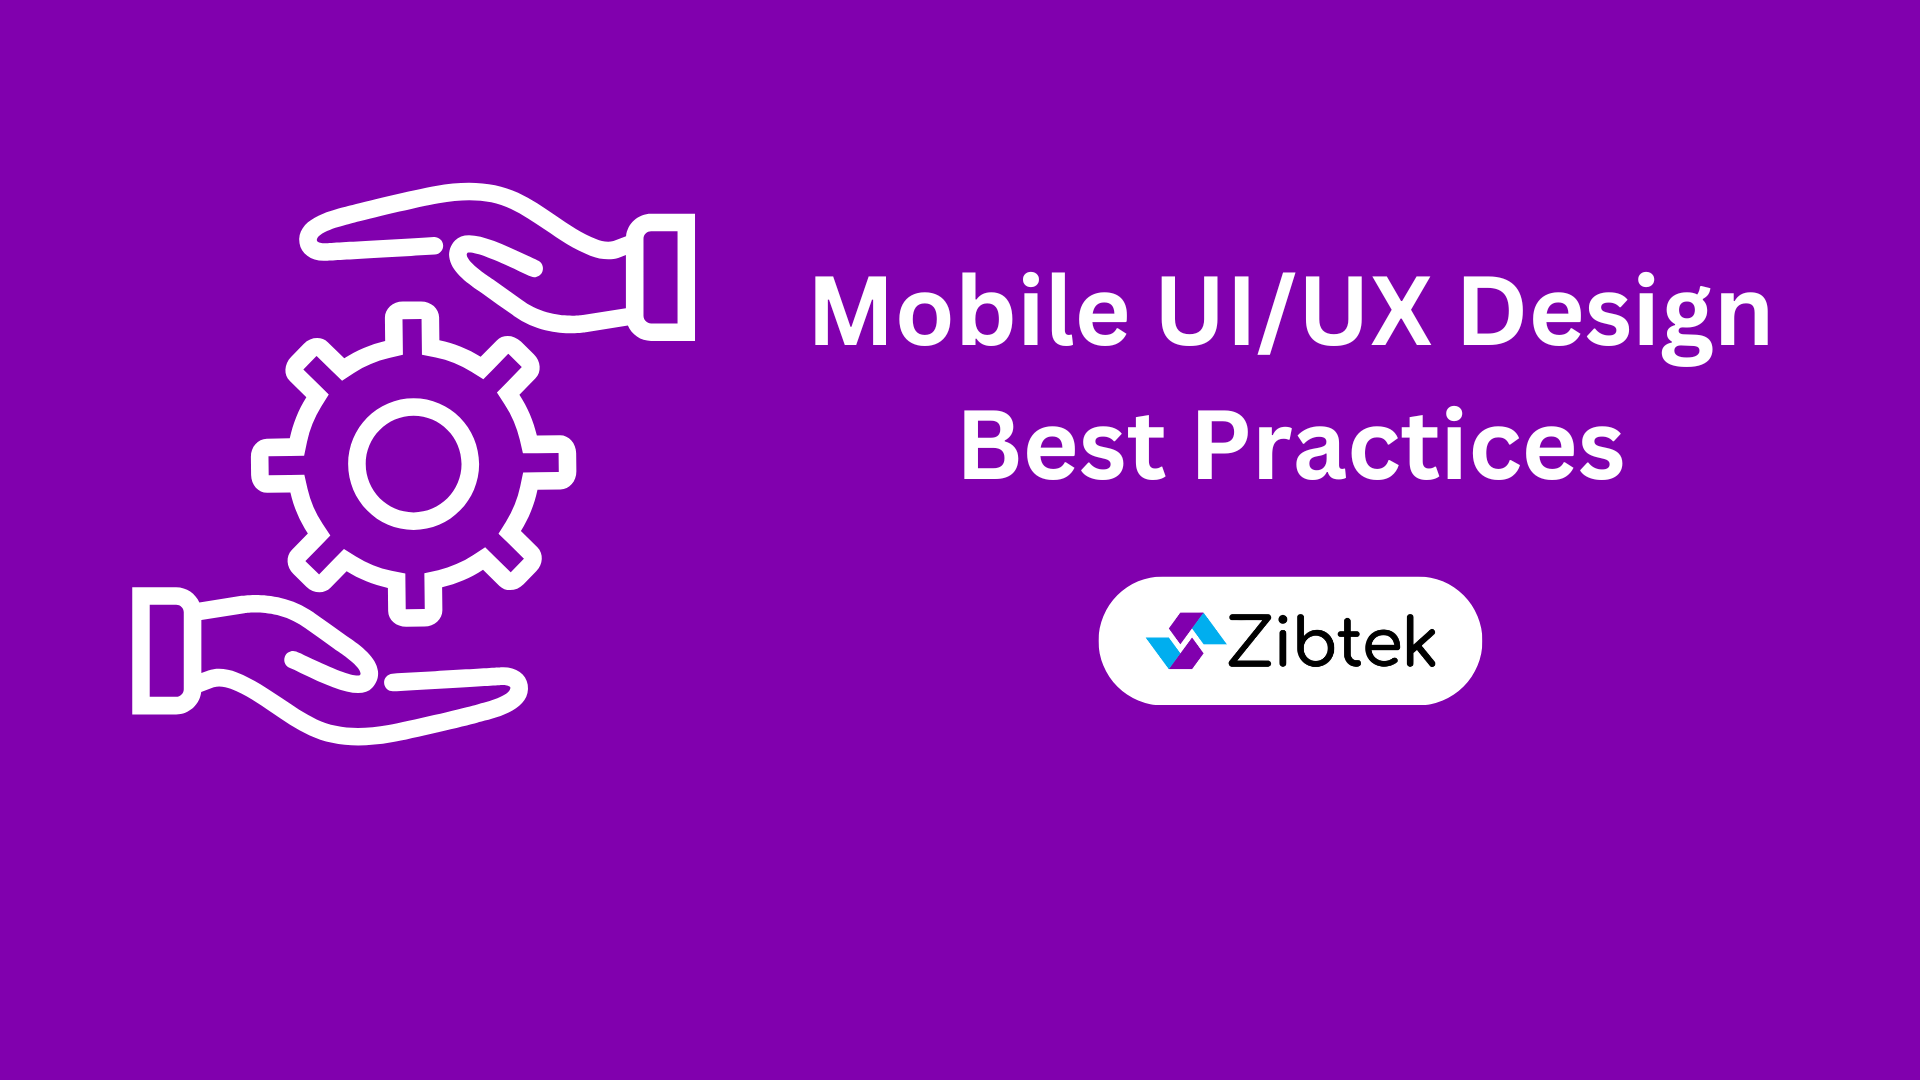 Graphic for UI/UX best practices mobile best practices